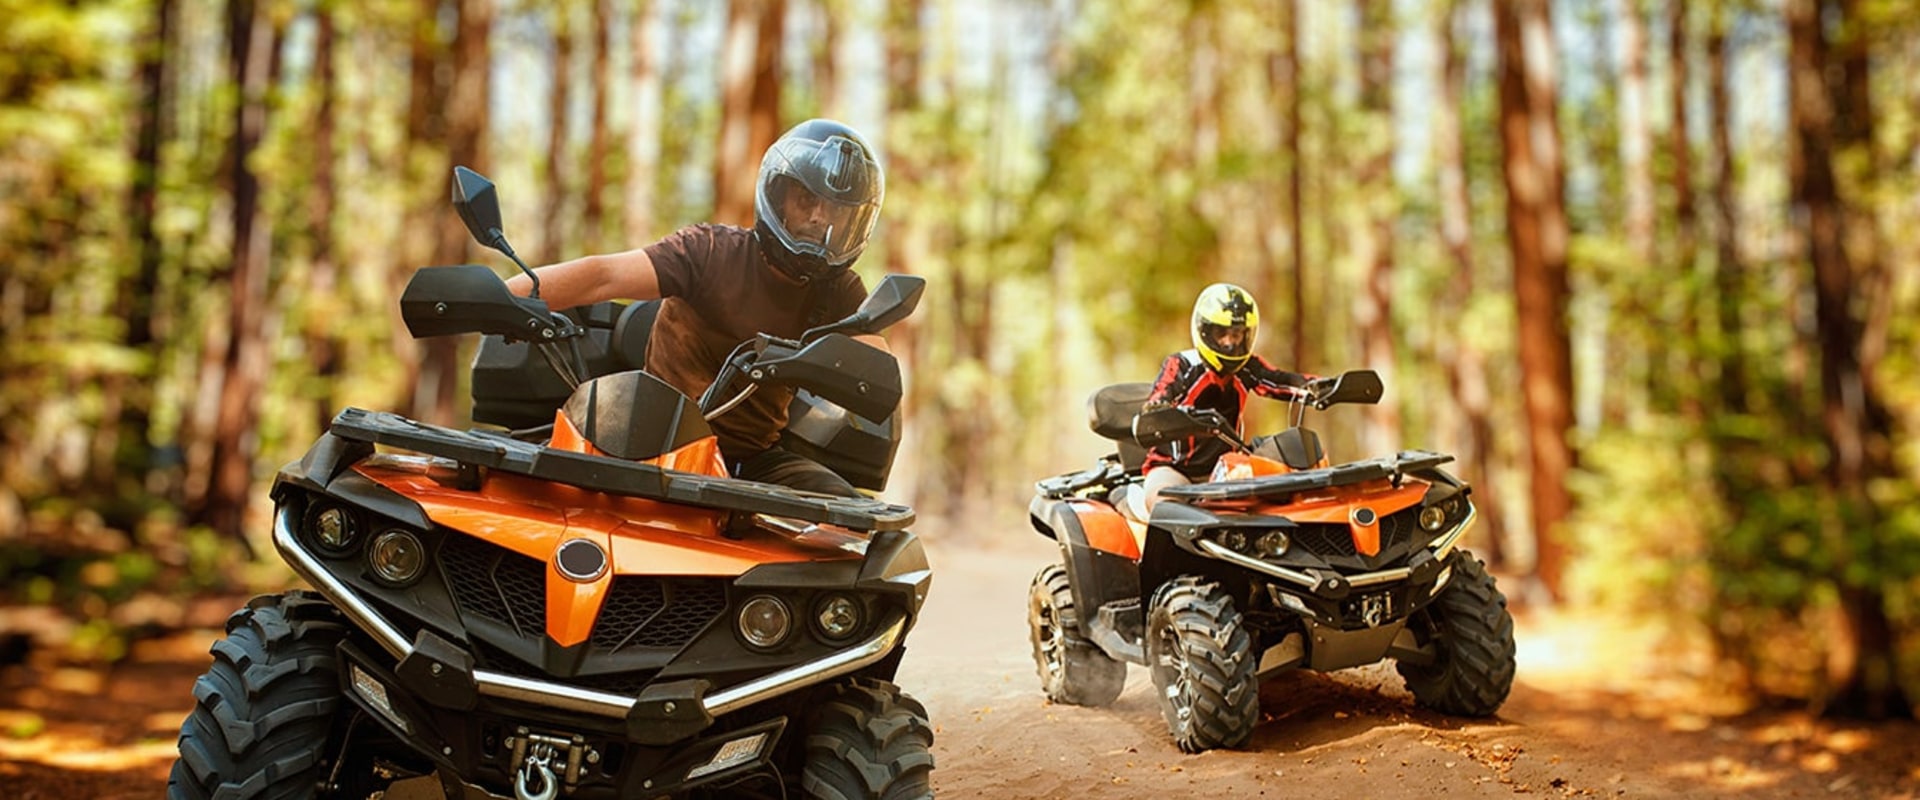 Exploring the All-Terrain Vehicle (ATV): What You Need to Know